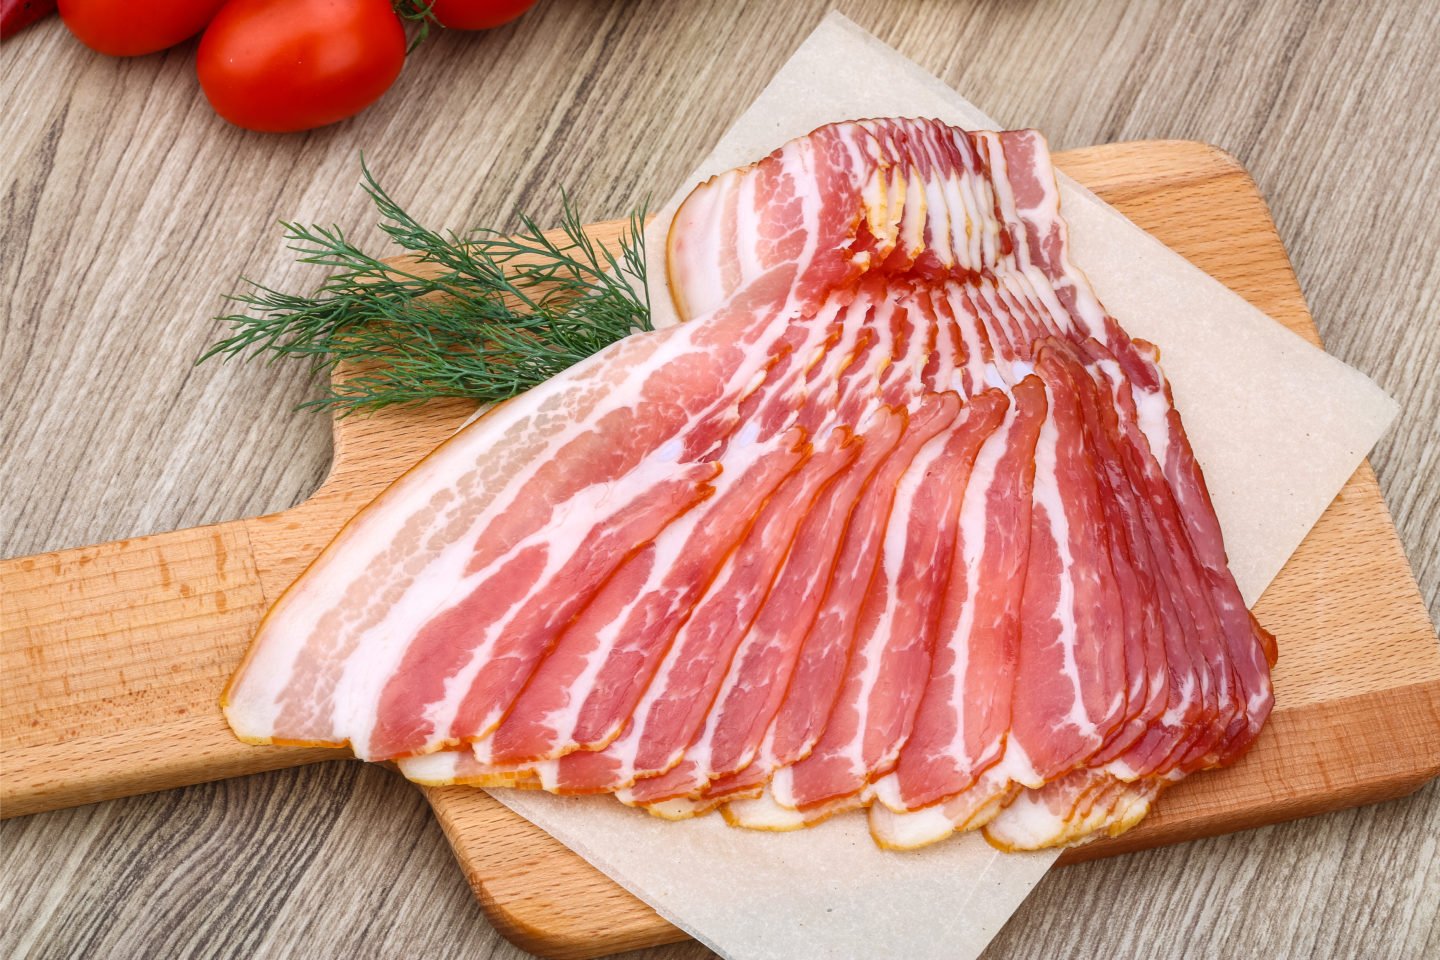 slices of raw bacon on cutting board